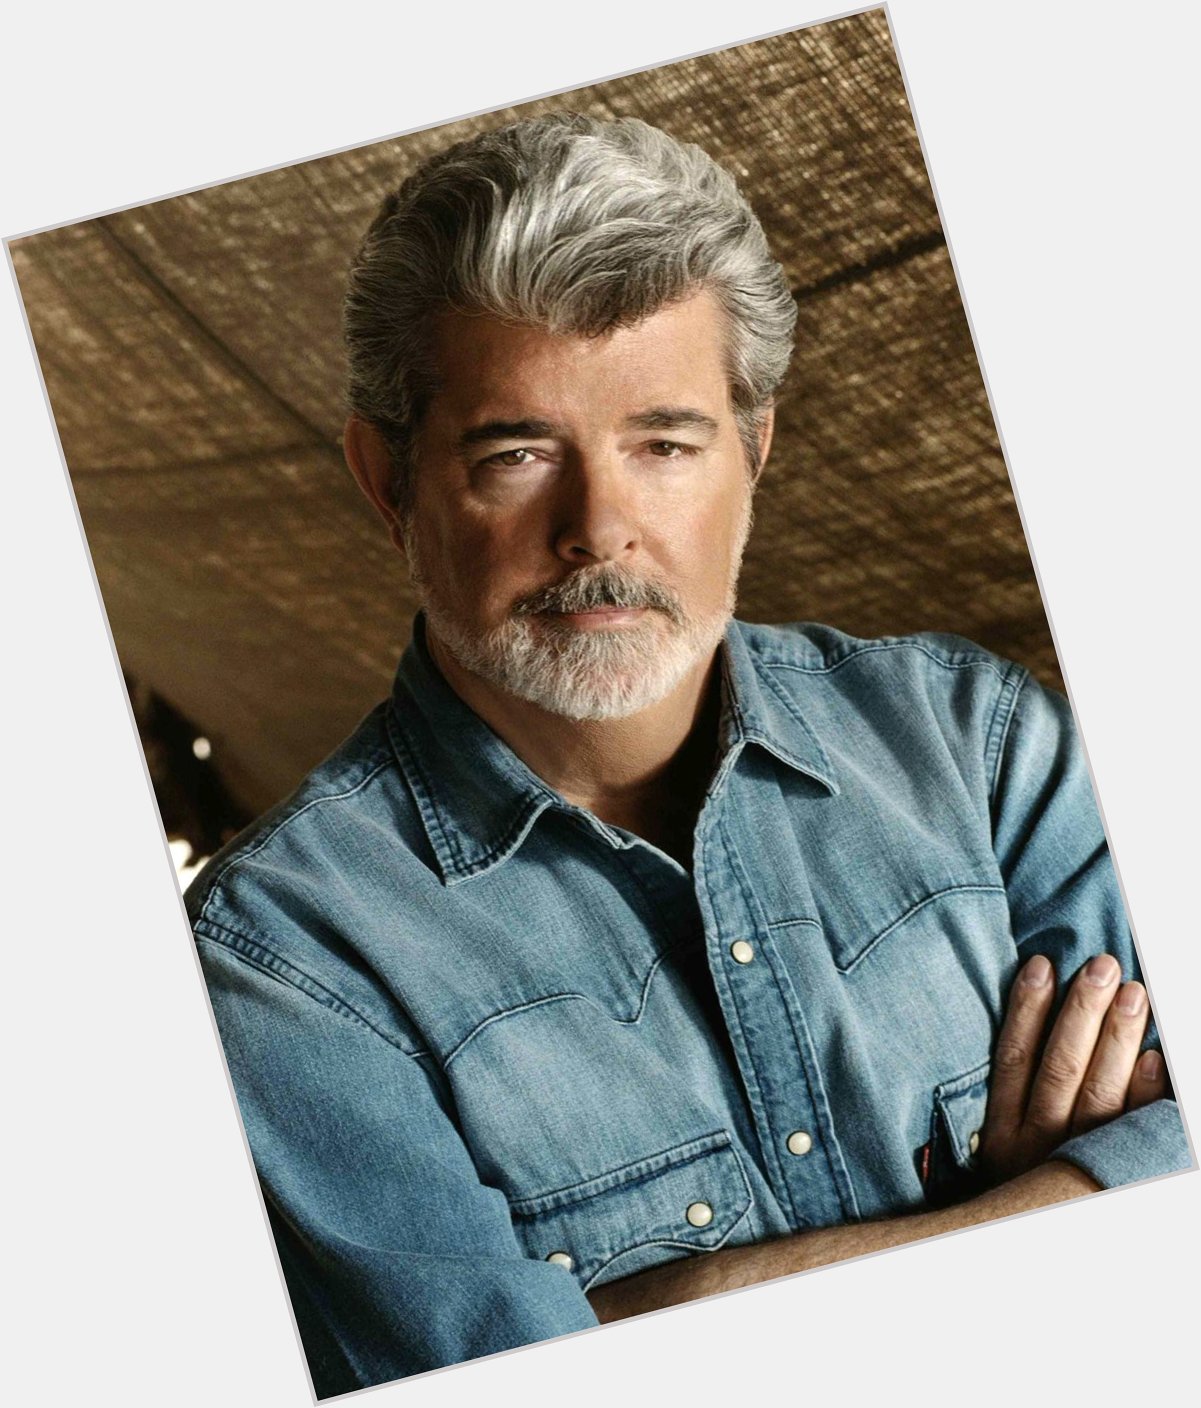  Happy Birthday, George Lucas May the Force be with you! 